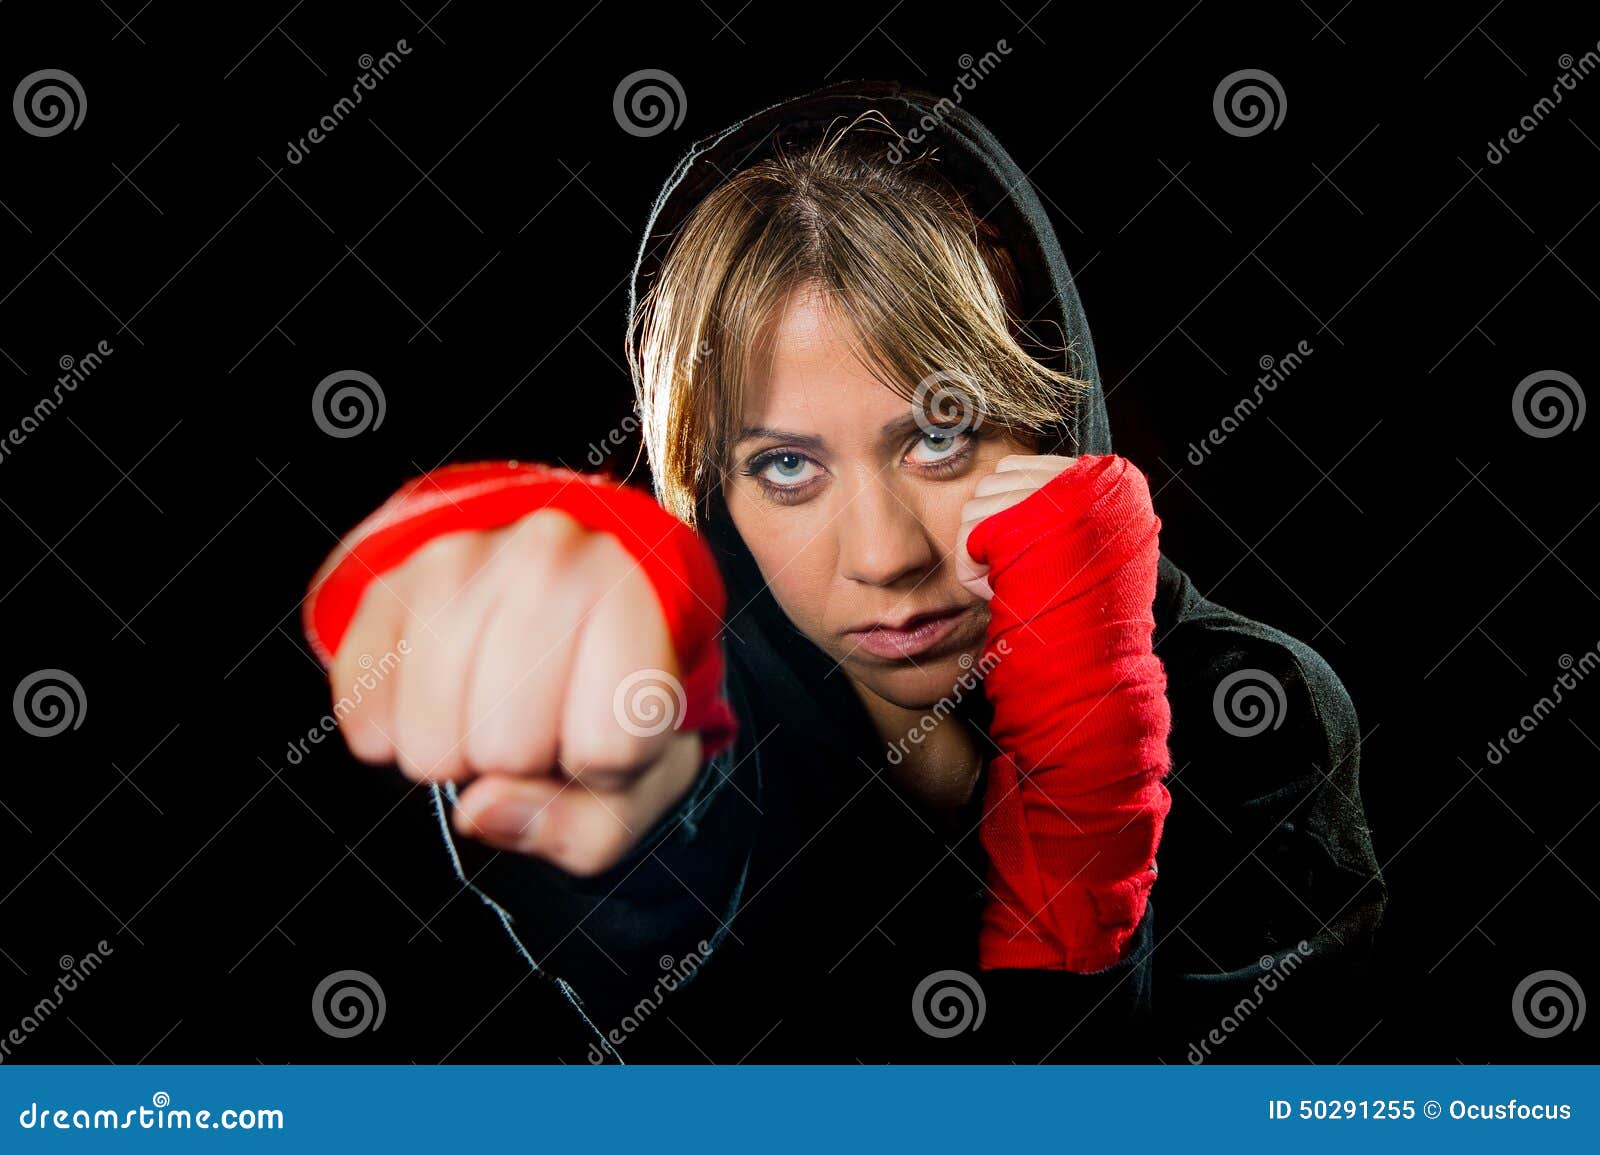 young dangerous girl shadow boxing with wrapped hands and wrists training workout